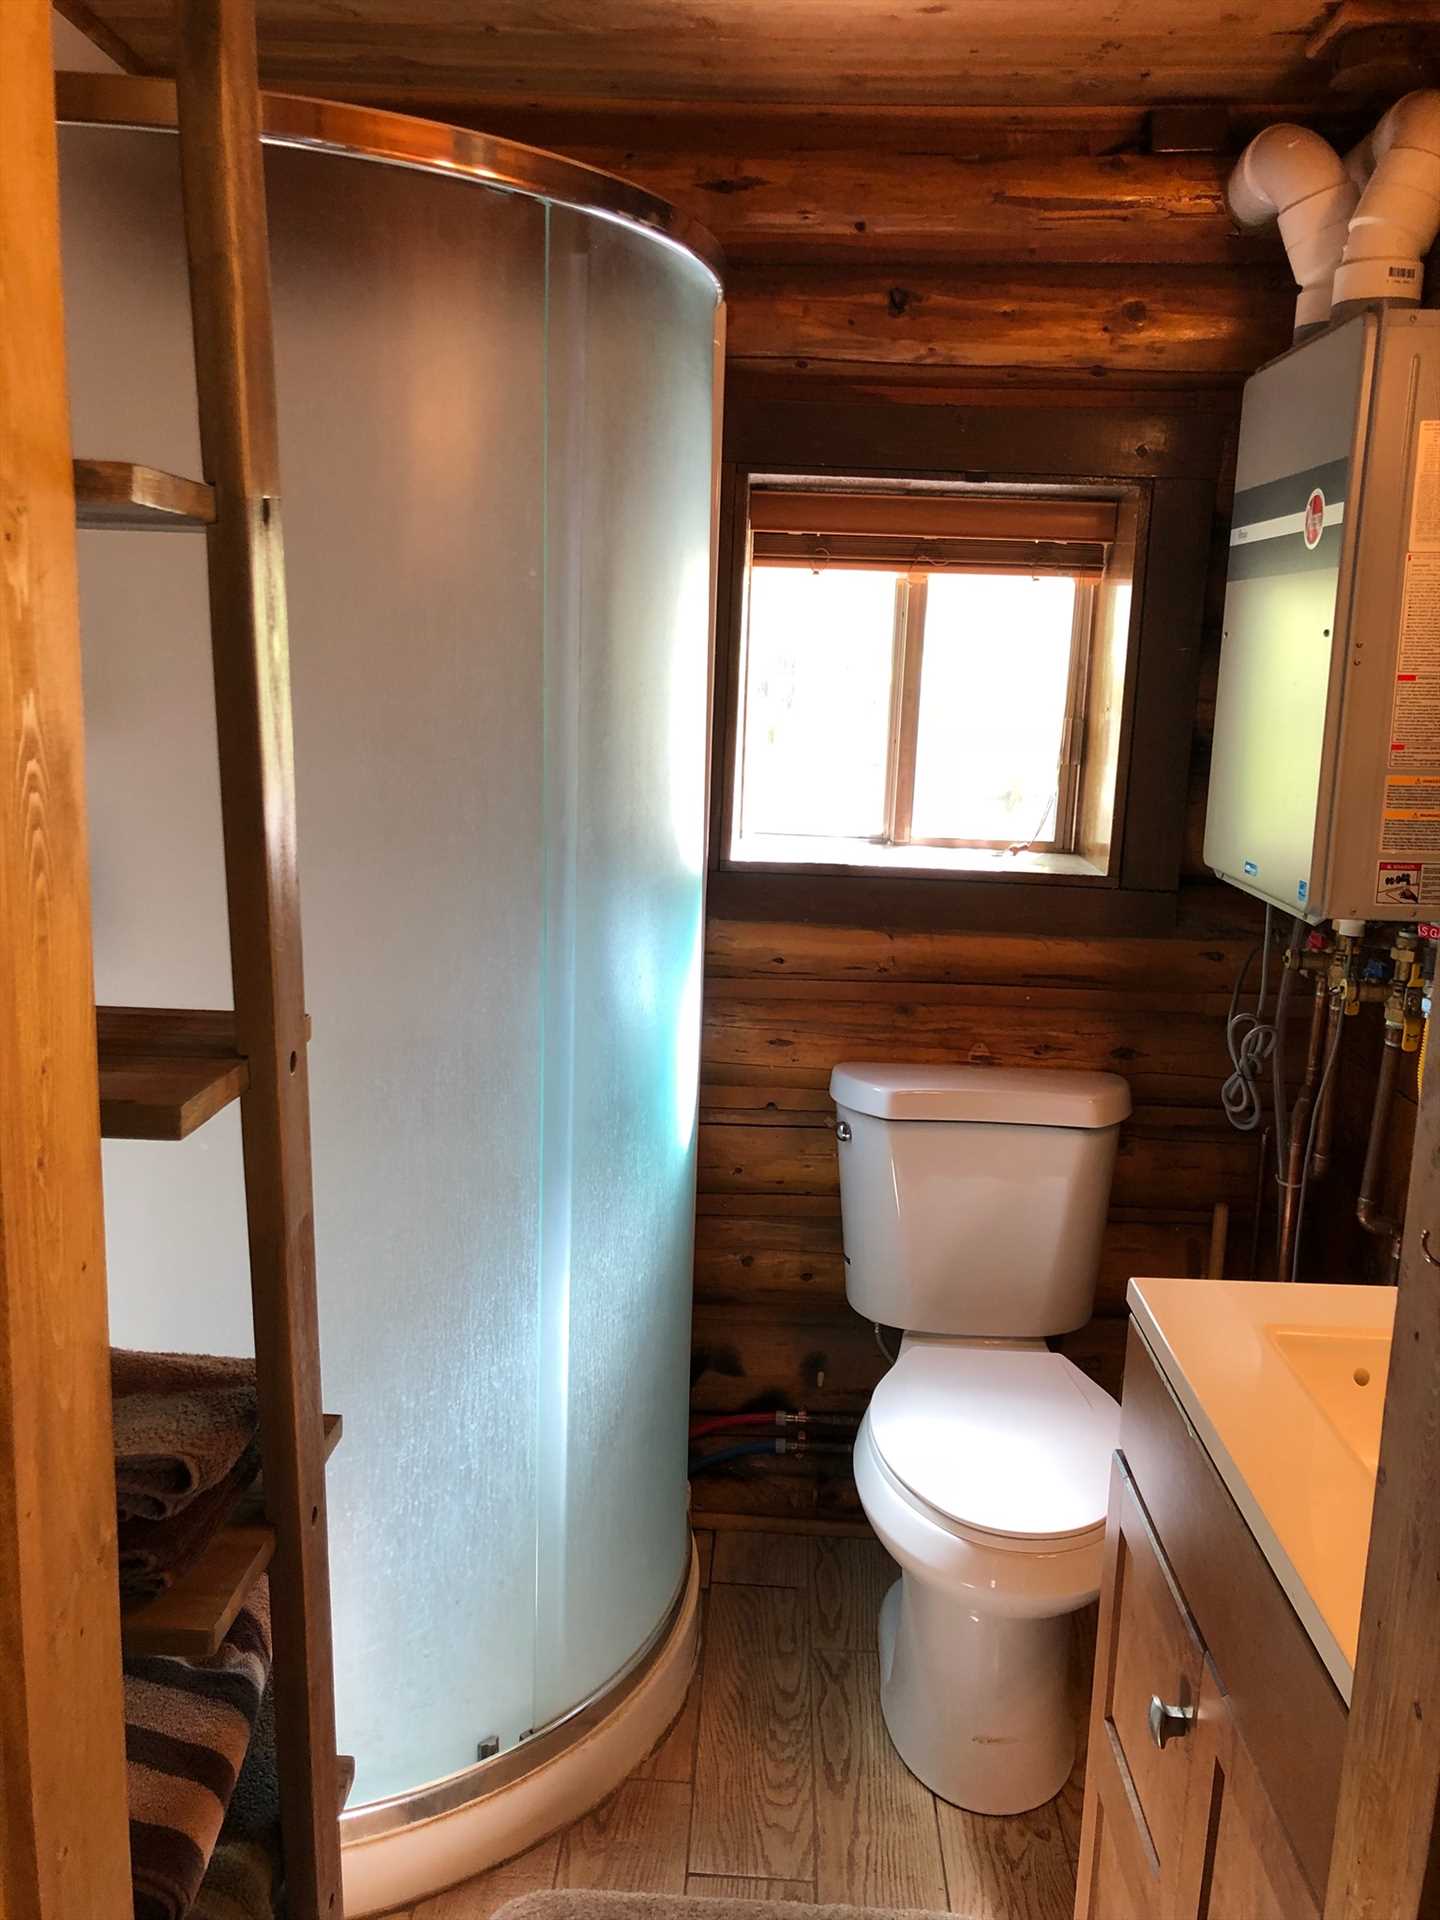 Newly Remodeled Bathroom with Instant Hot Water Heater